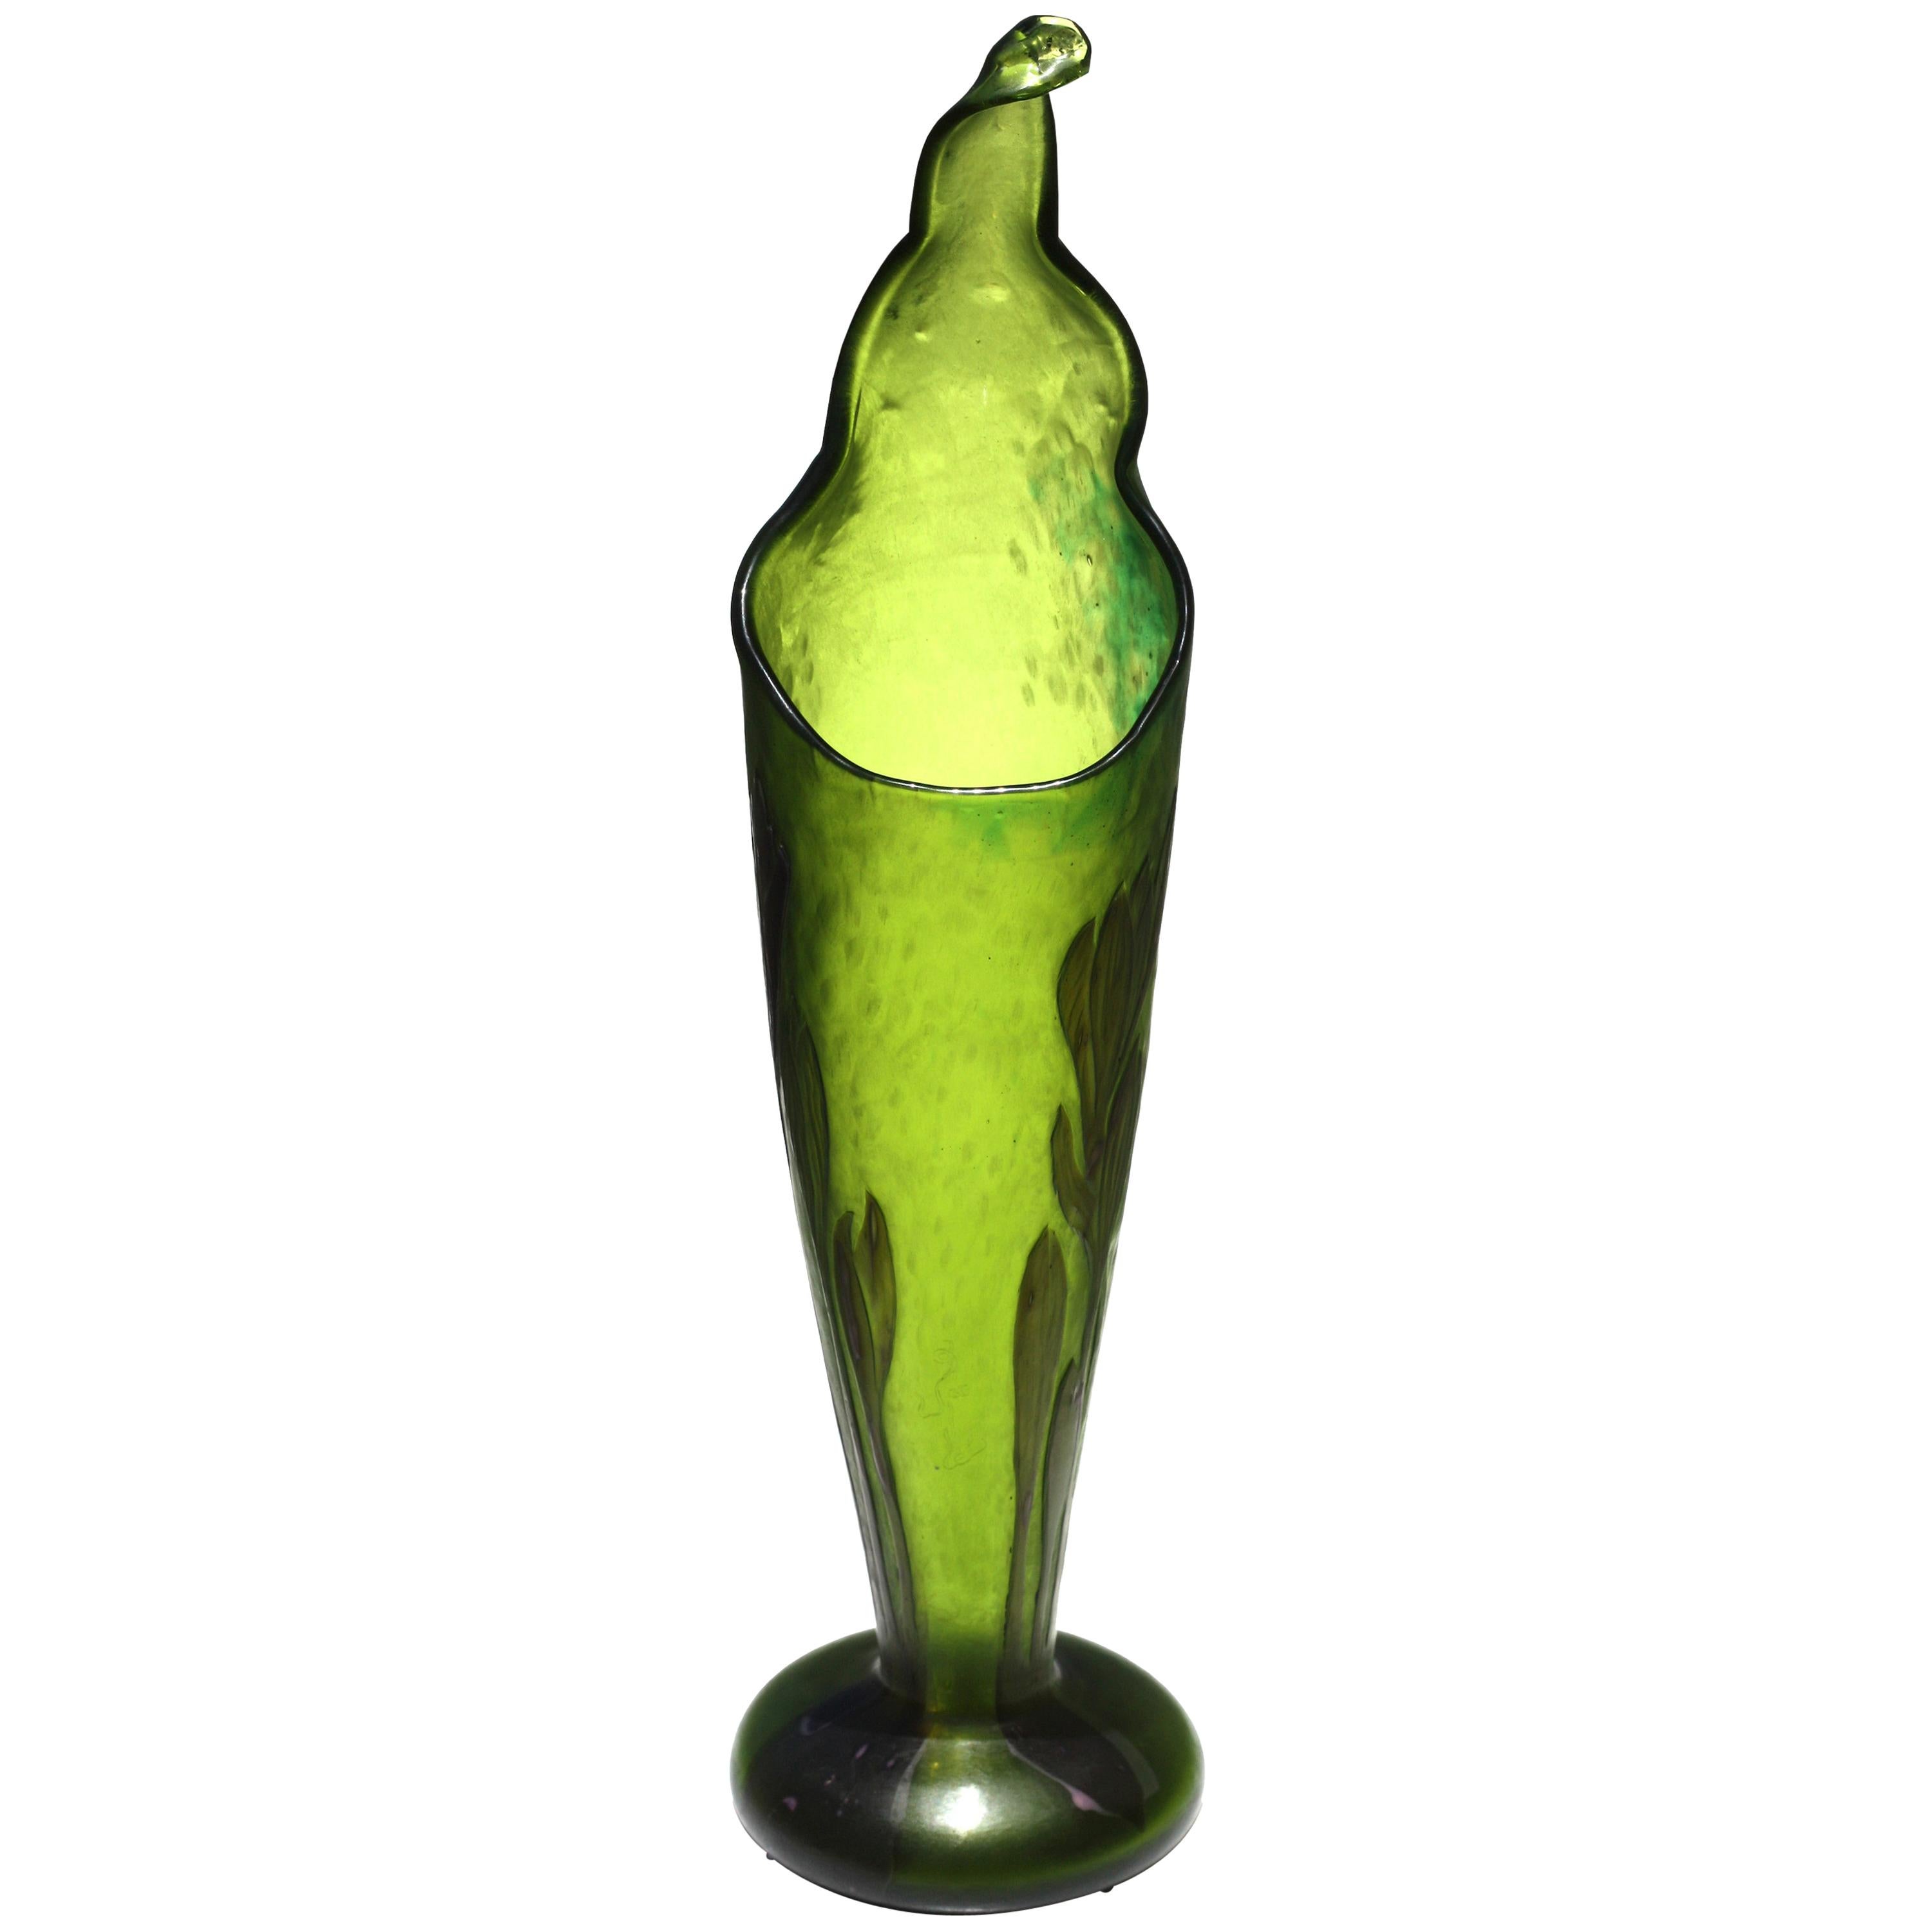 Rare Emile Gallé Crocus Marqueterie-Sur-Verre glass vase, circa 1900, incised Gallé in script on the vessel, the bottle-green tapering vessel with an undulating leaf-shaped opening with an extended upward scrolled flange, on a circular spreading